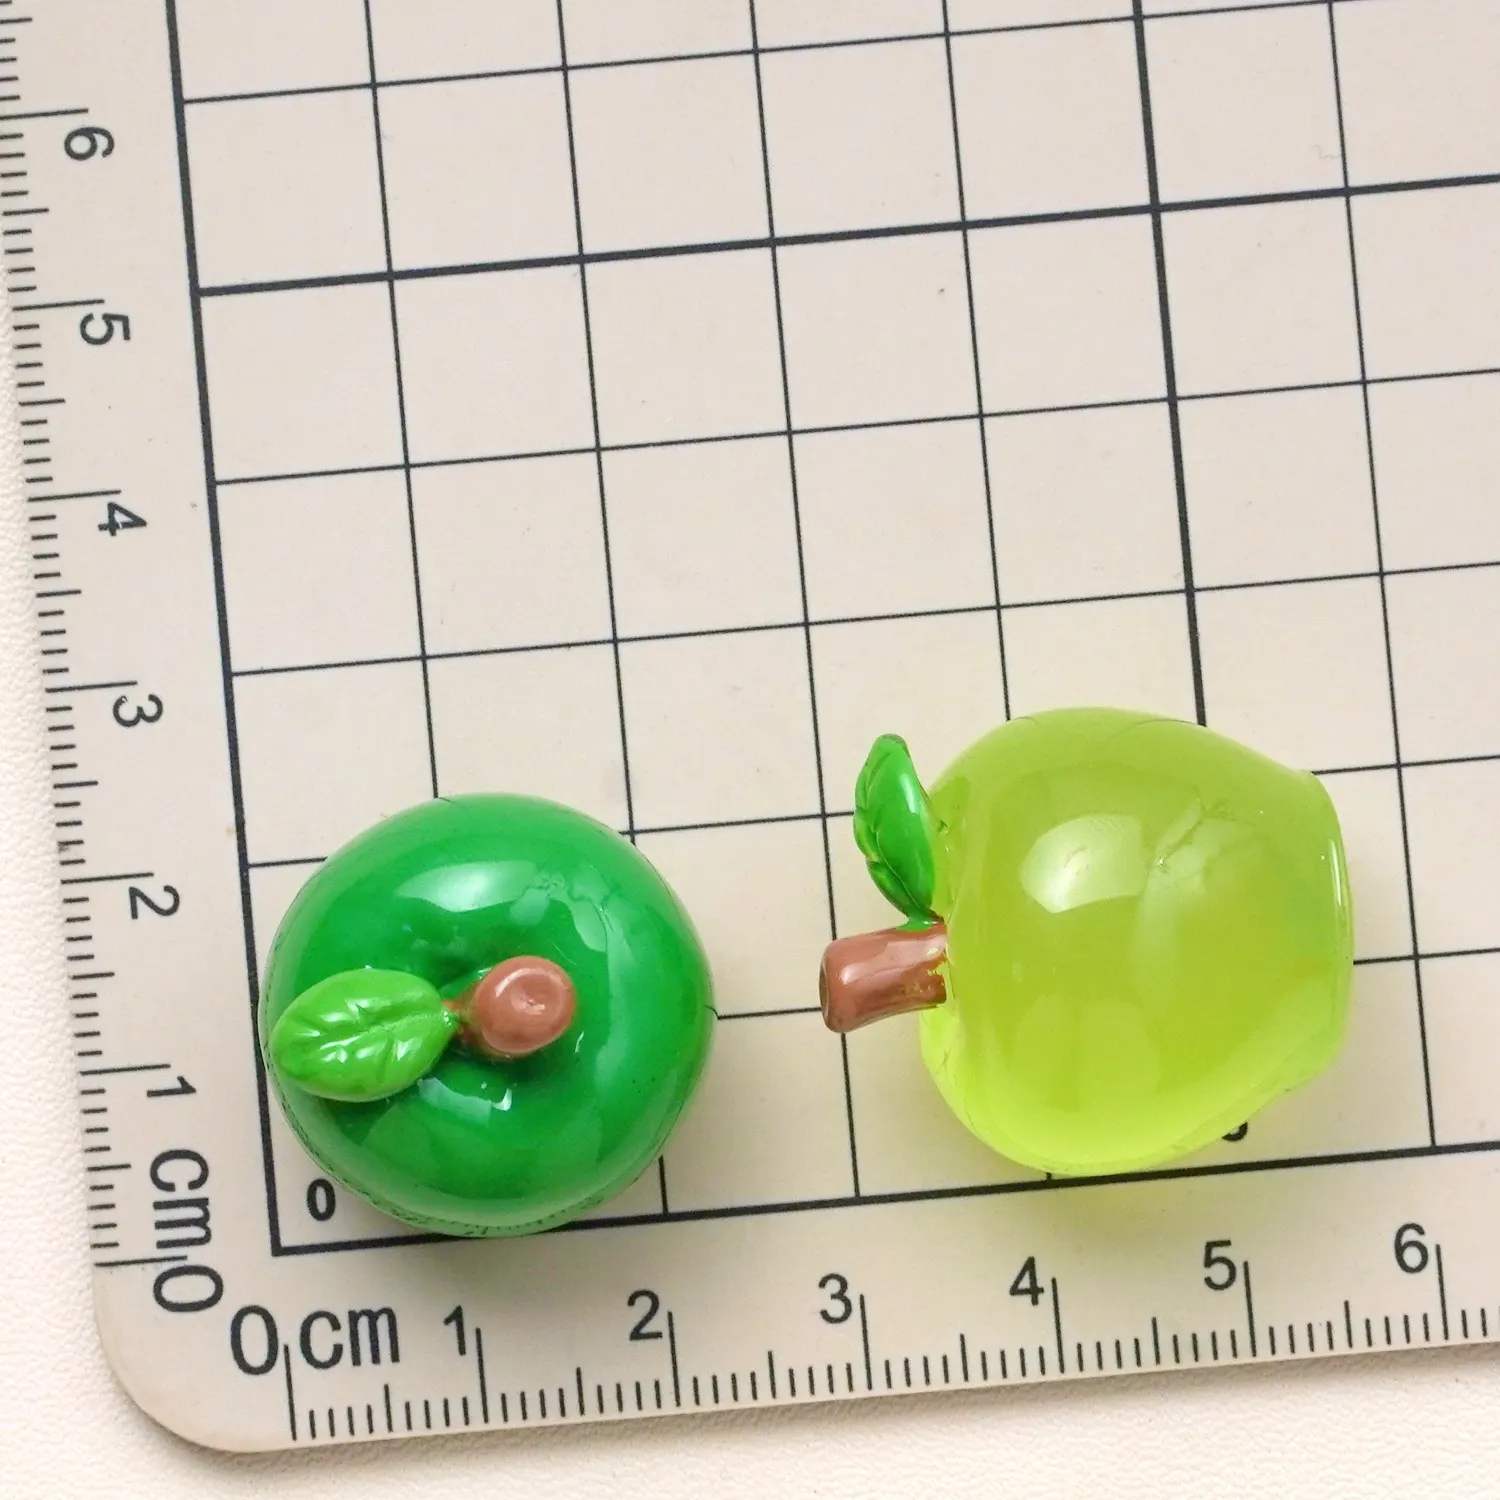 New style colorful artificial 3D apple resin art crafts for cell phone chain pendant charms DIY car embellishments party decor